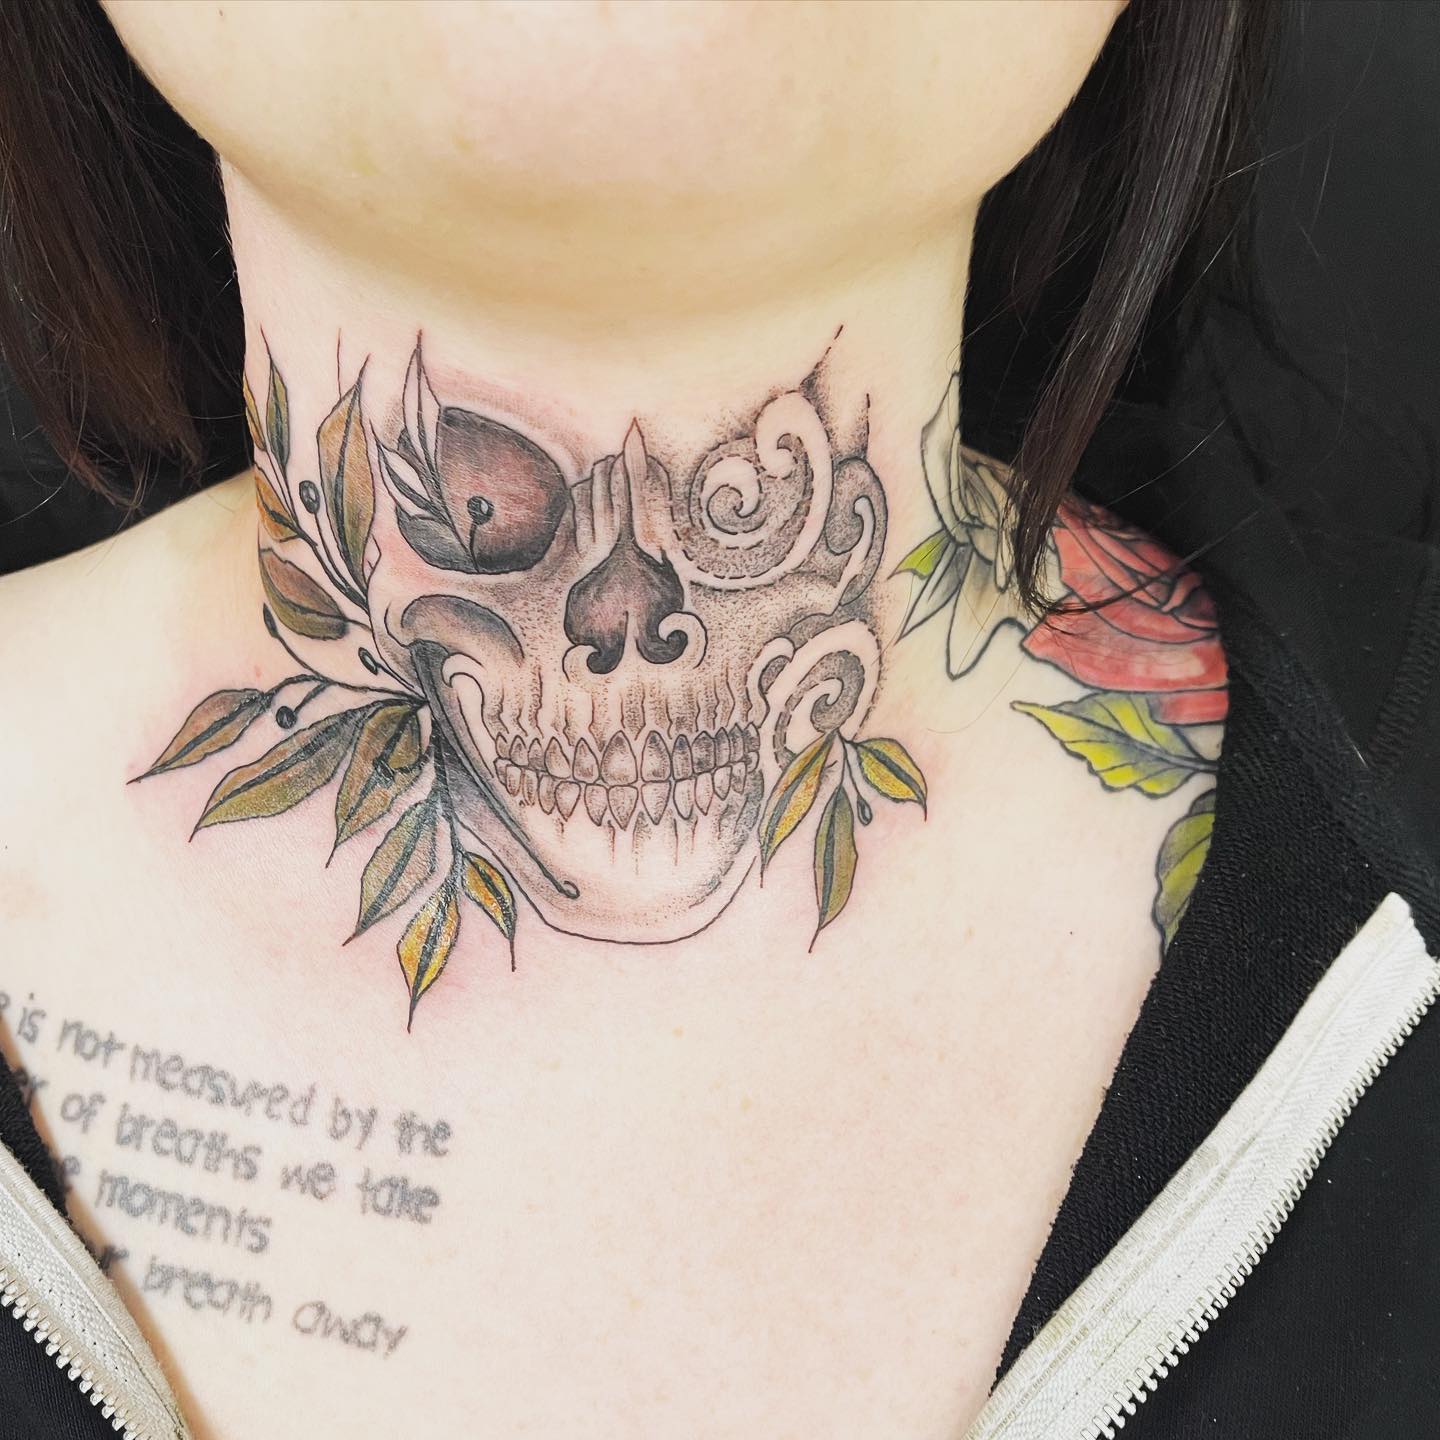 Skulls look scary but their tattoo meaning is so powerful. They symbolize the situation of overcoming hard challenges and maybe even death. The green leaves covering the skull give it a great and a more positive look.